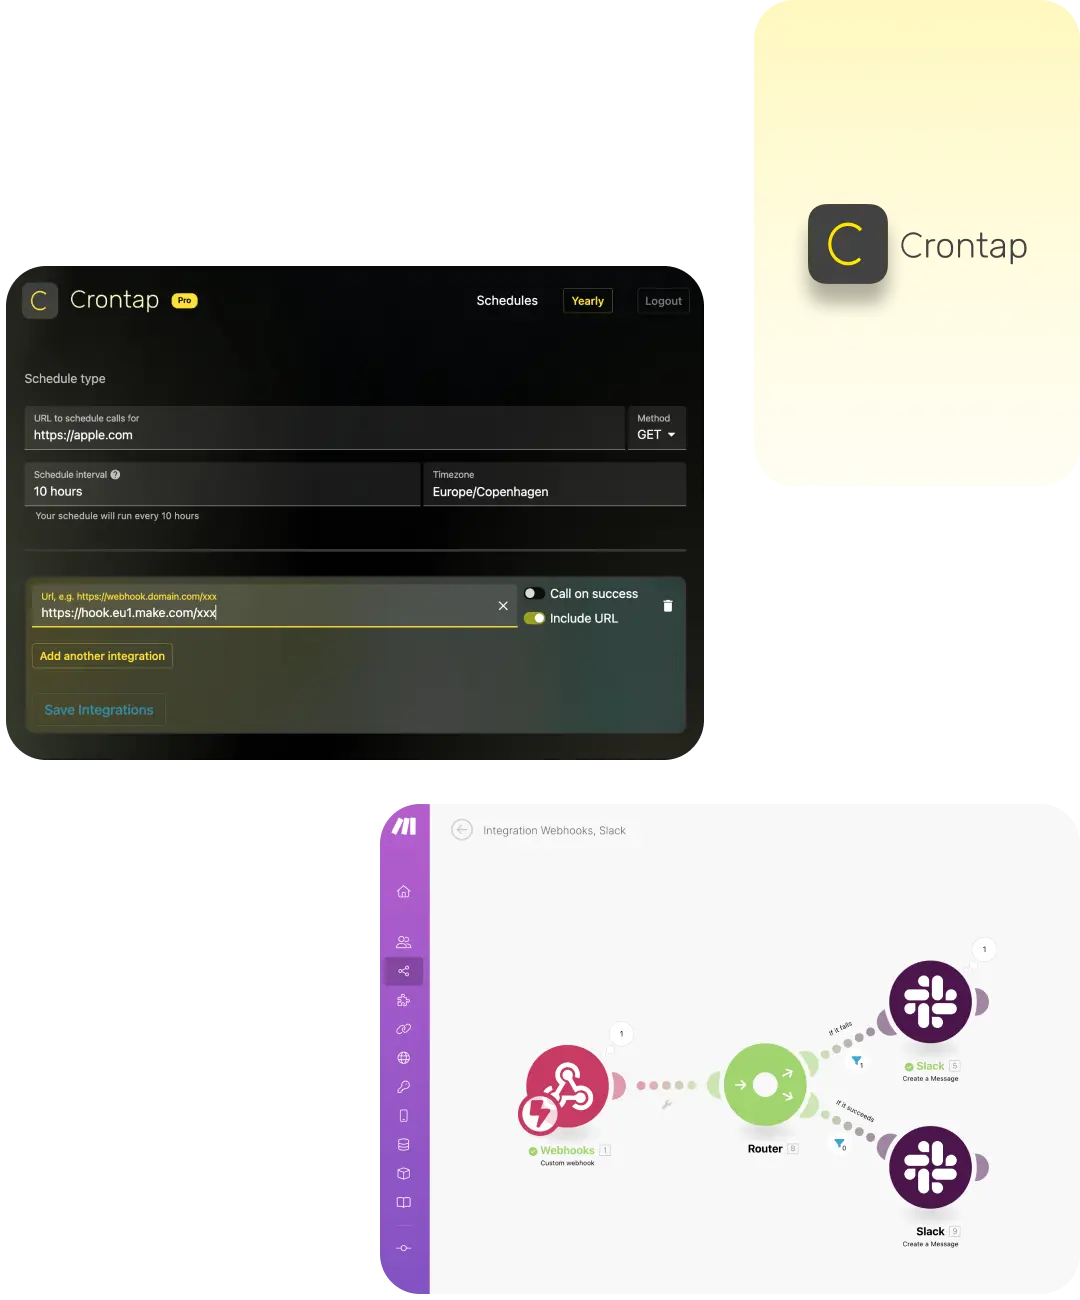 Learn how to use Crontap webhook schedules to integrate with Make.com and thousands of apps: sms, email, telegram, airtable, slack, teams, twitter or your own custom webhook e.g. a cloud function.